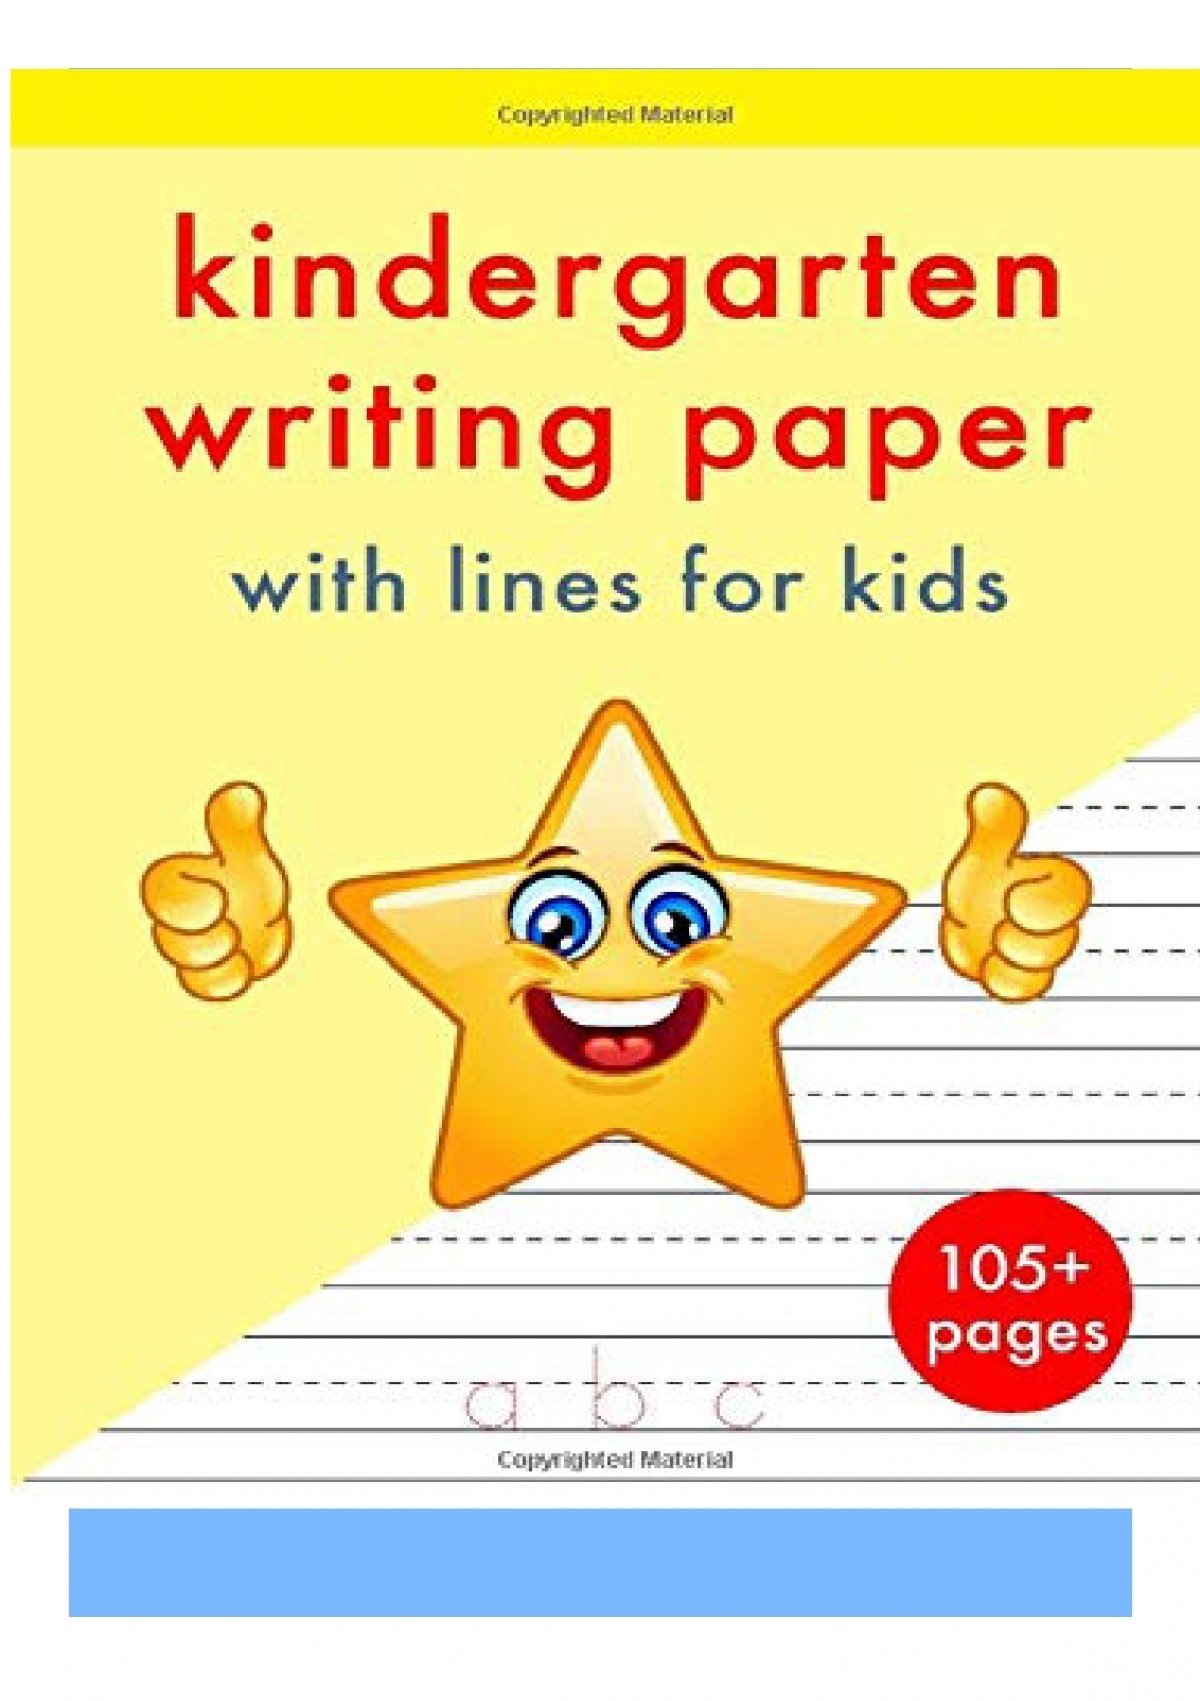 doc-kindergarten-writing-paper-with-lines-for-kids-105-dotted-line